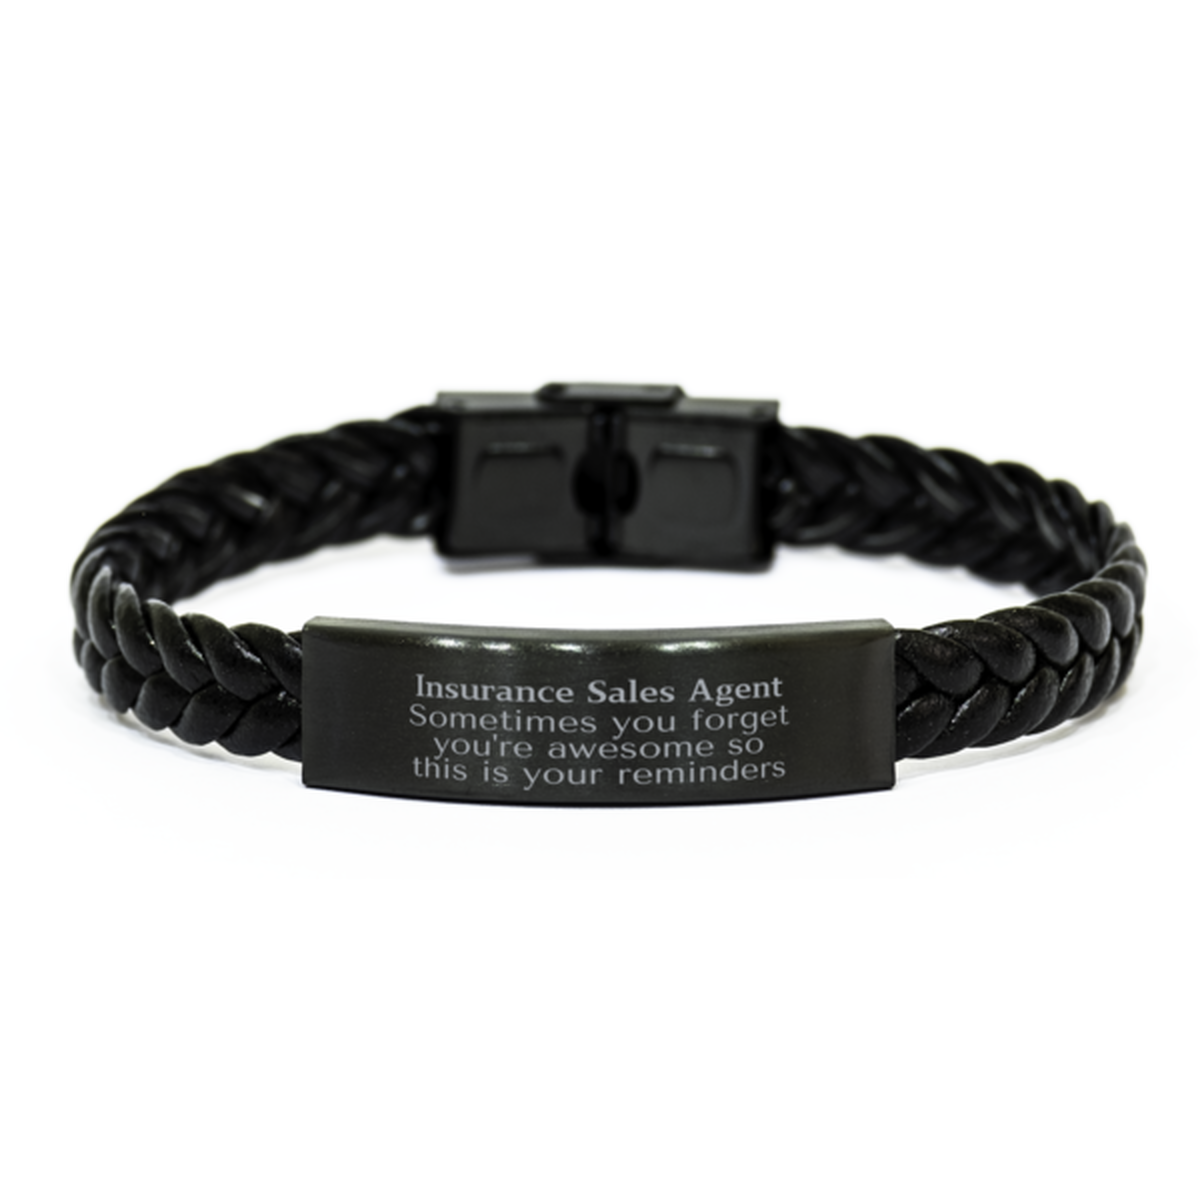 Sentimental Insurance Sales Agent Braided Leather Bracelet, Insurance Sales Agent Sometimes you forget you're awesome so this is your reminders, Graduation Christmas Birthday Gifts for Insurance Sales Agent, Men, Women, Coworkers